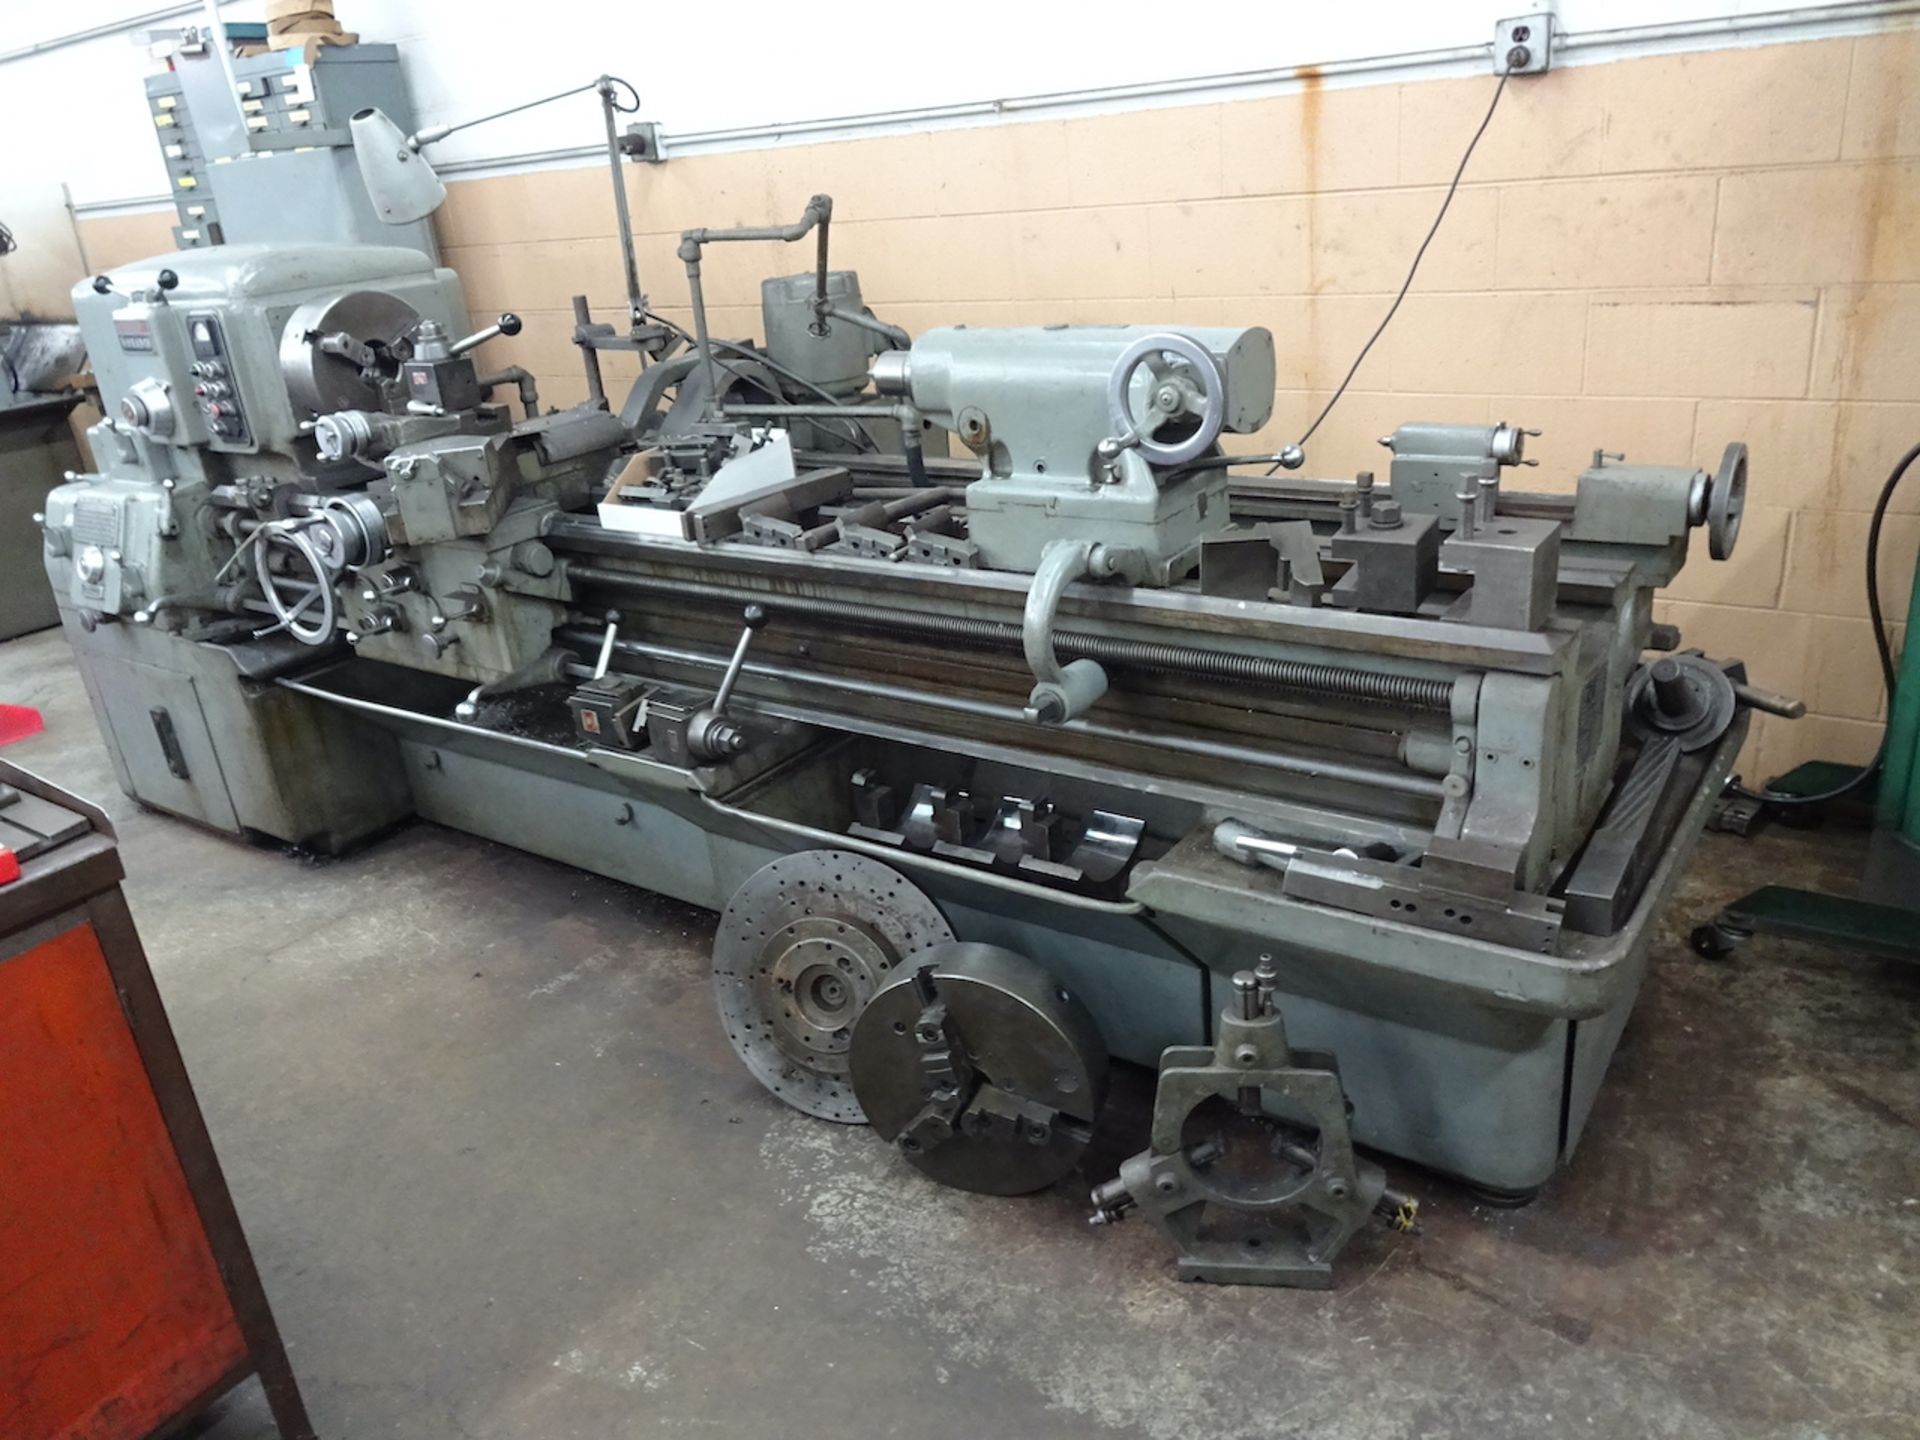 Monarch 20 in. x 78 in. Model 610 Engine Lathe, S/N 45676-AT (1962), 12 in. 3-Jaw Chuck, 16 in. 3-